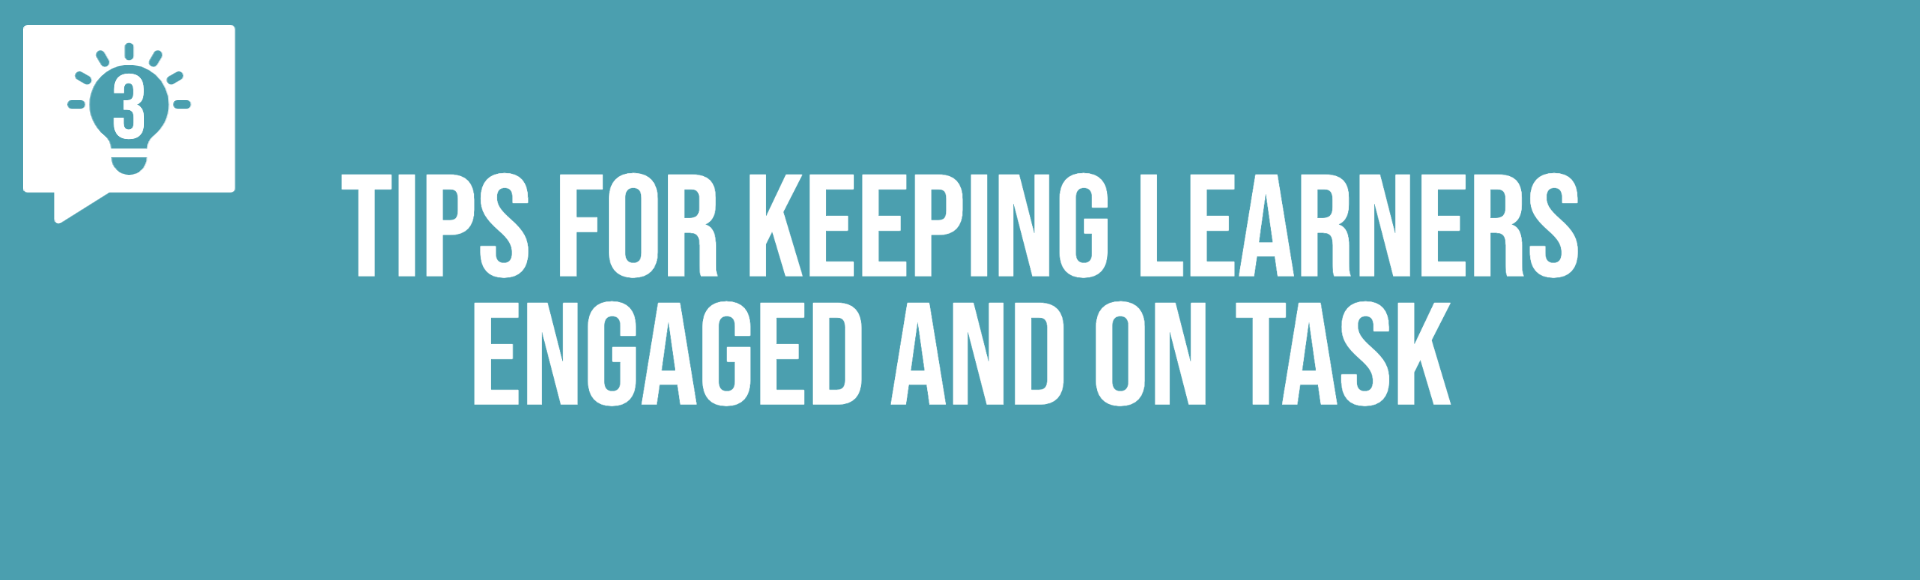 Tips for keeping learning engaged and on task